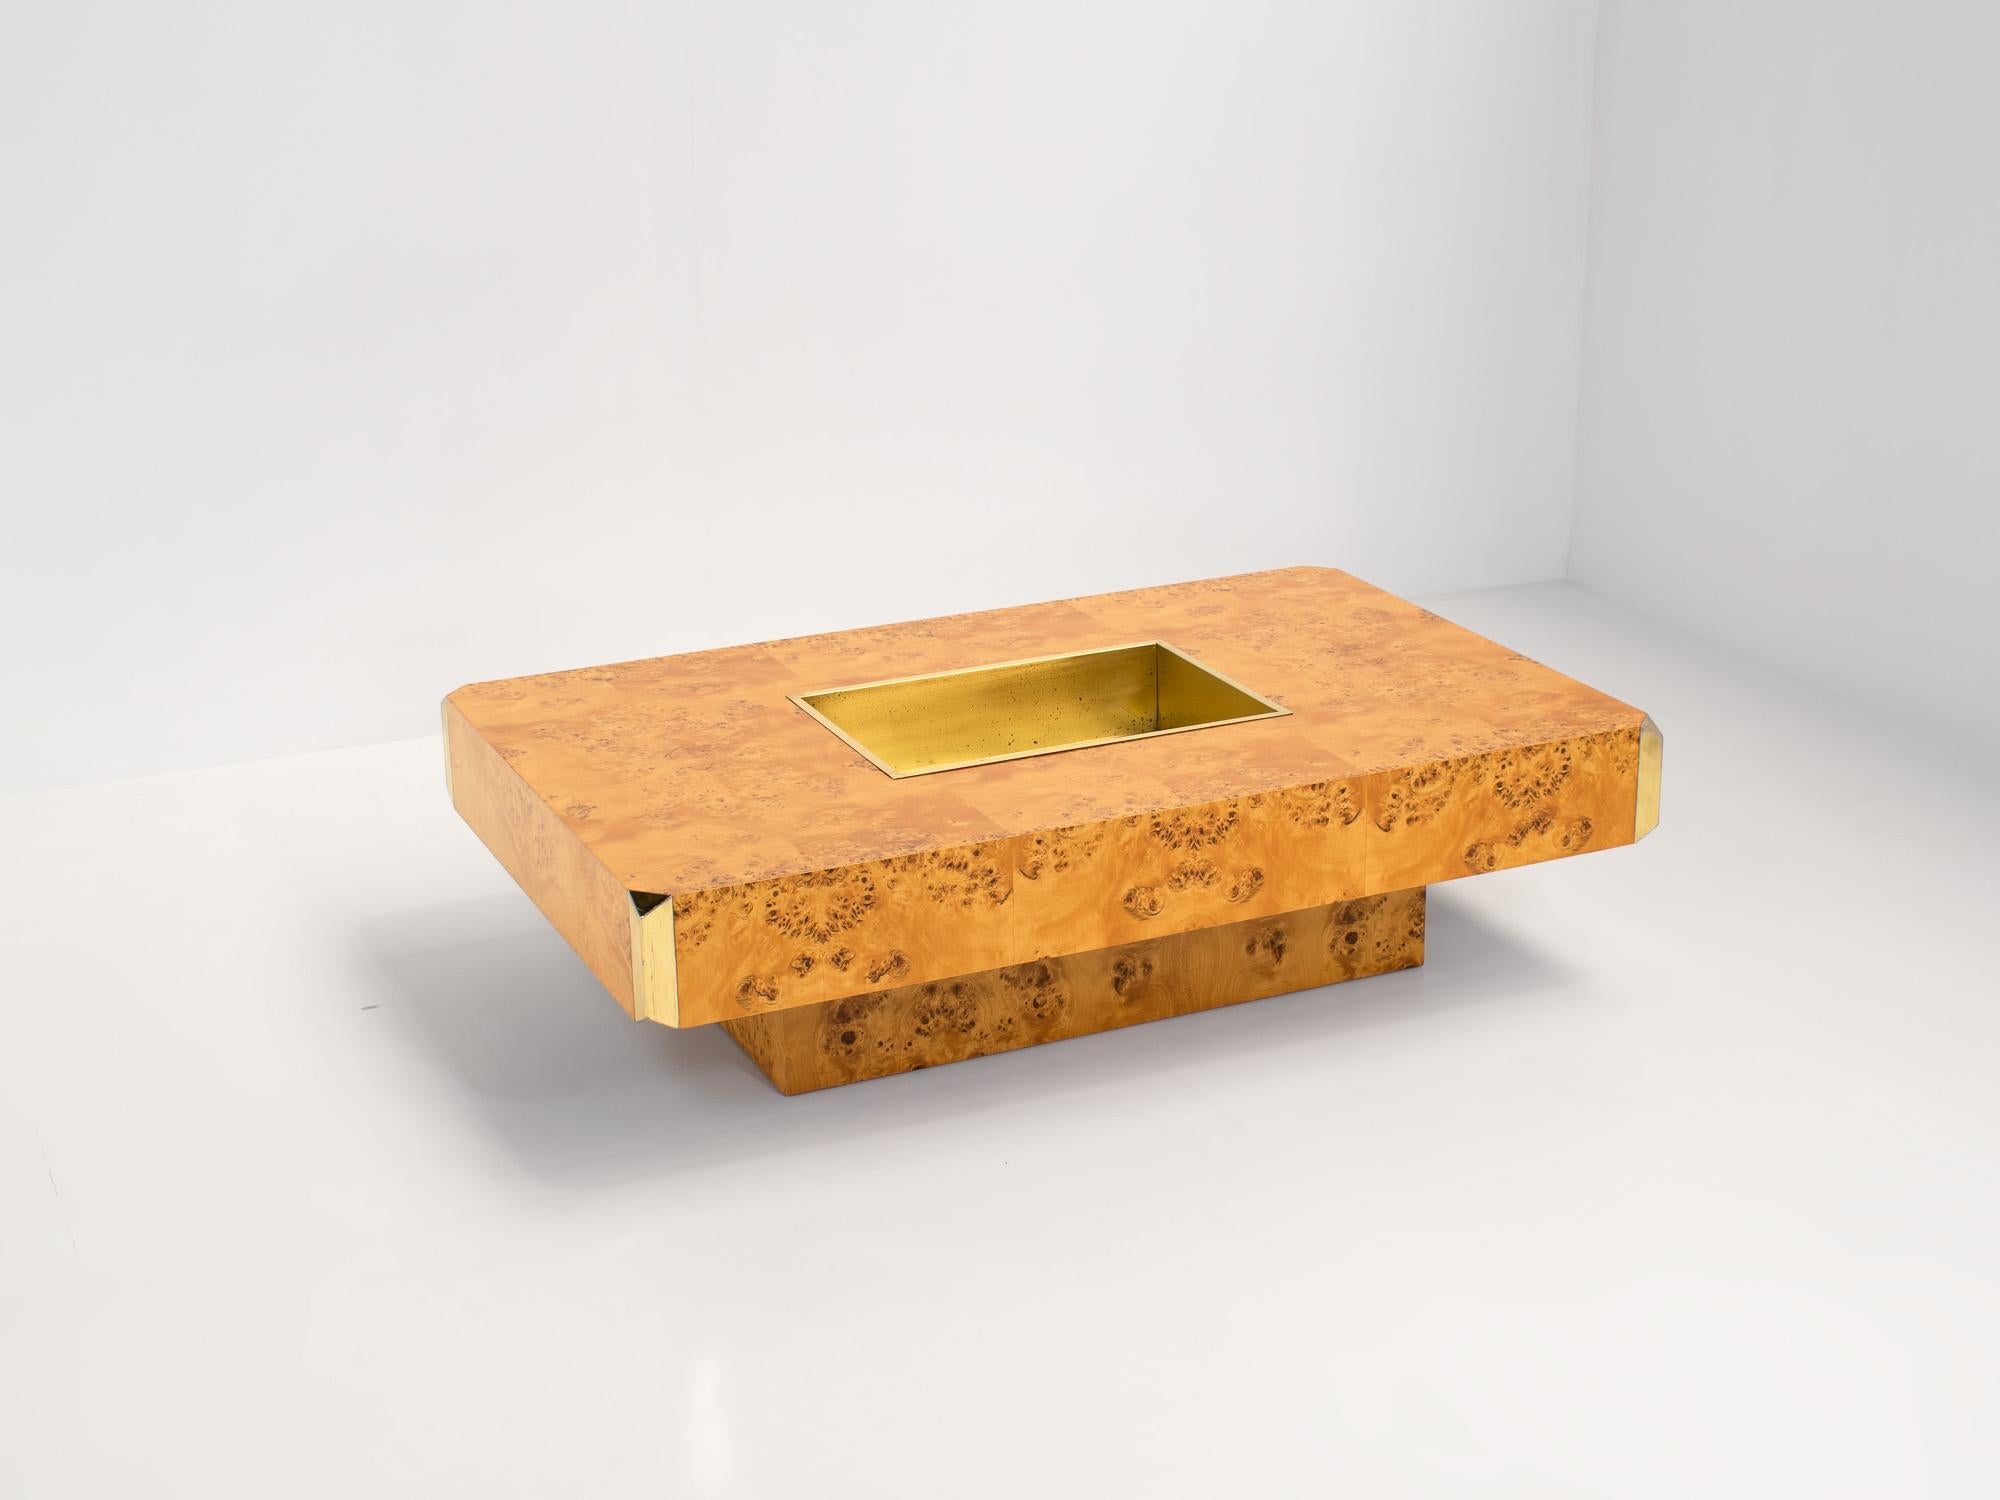 Glamorous mid-century coffee table by Willy Rizzo designed for Mario Sabot, Italy 1970s. Besides being functional, it is also a great decorative item. 

The table is made of laminated burl wood and brass corners with a central tray that can be